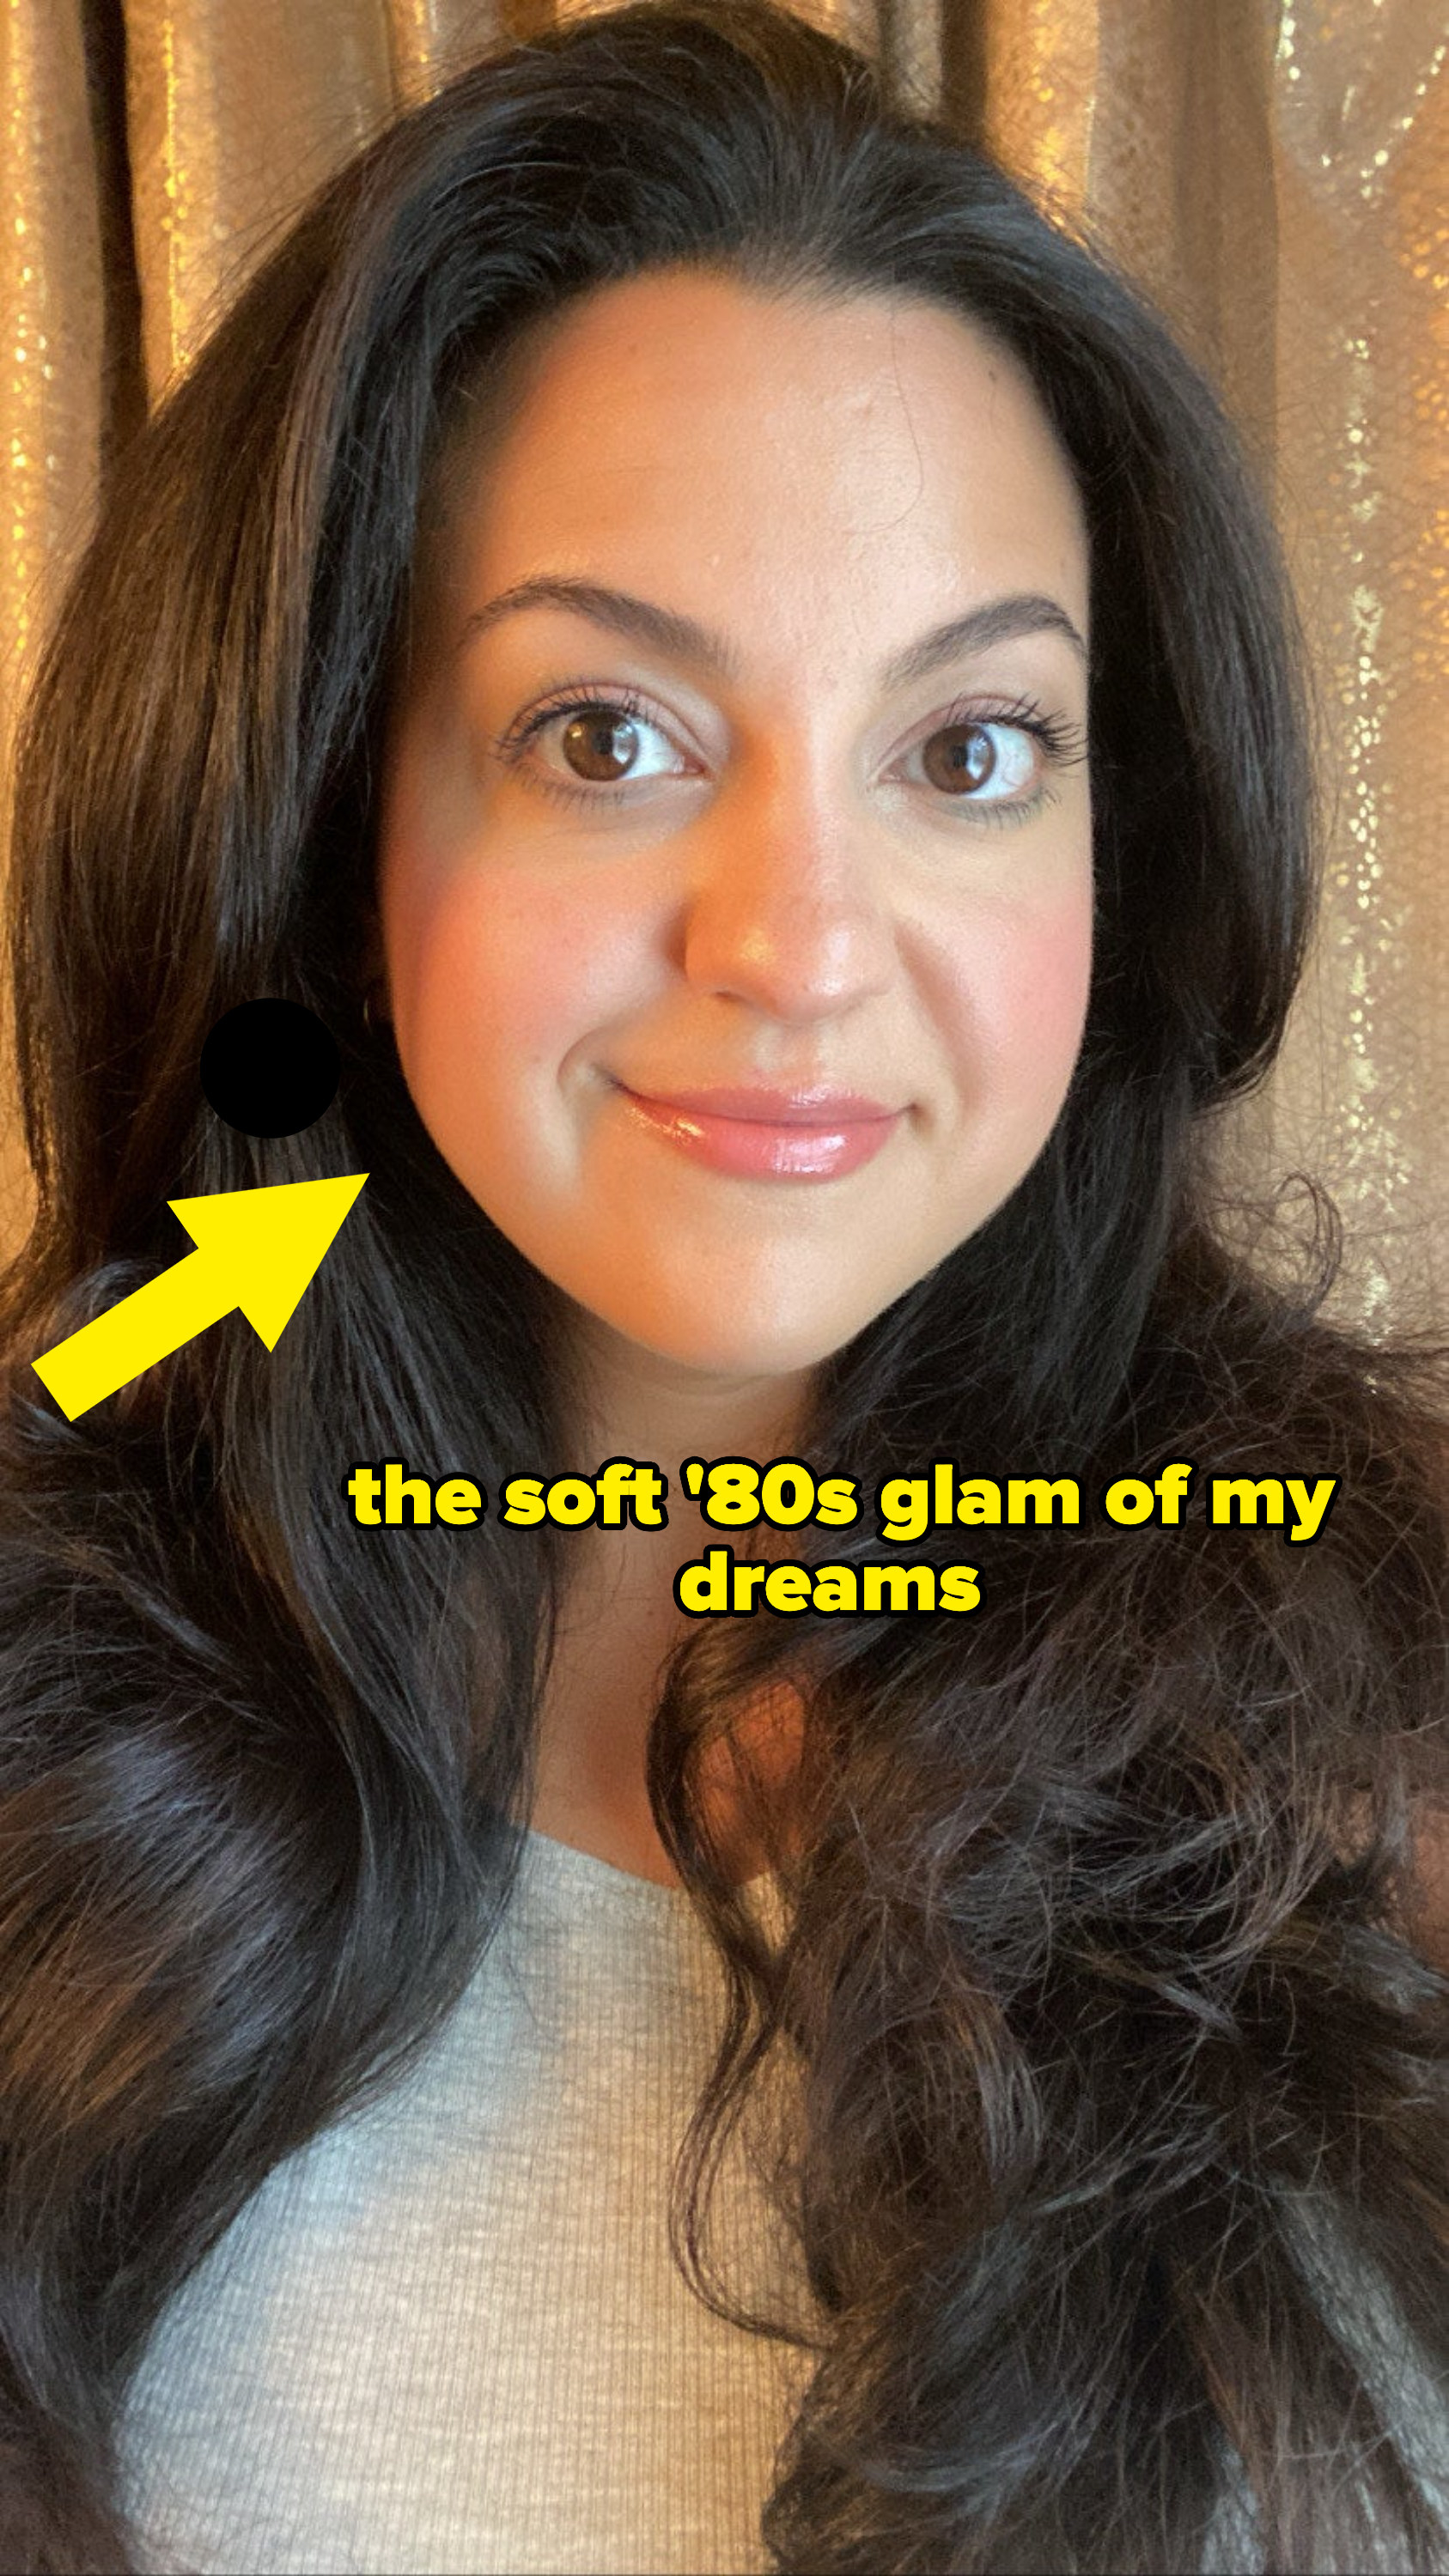 The author smiling with the words &quot;the soft &#x27;80s glam of my dreams&quot;